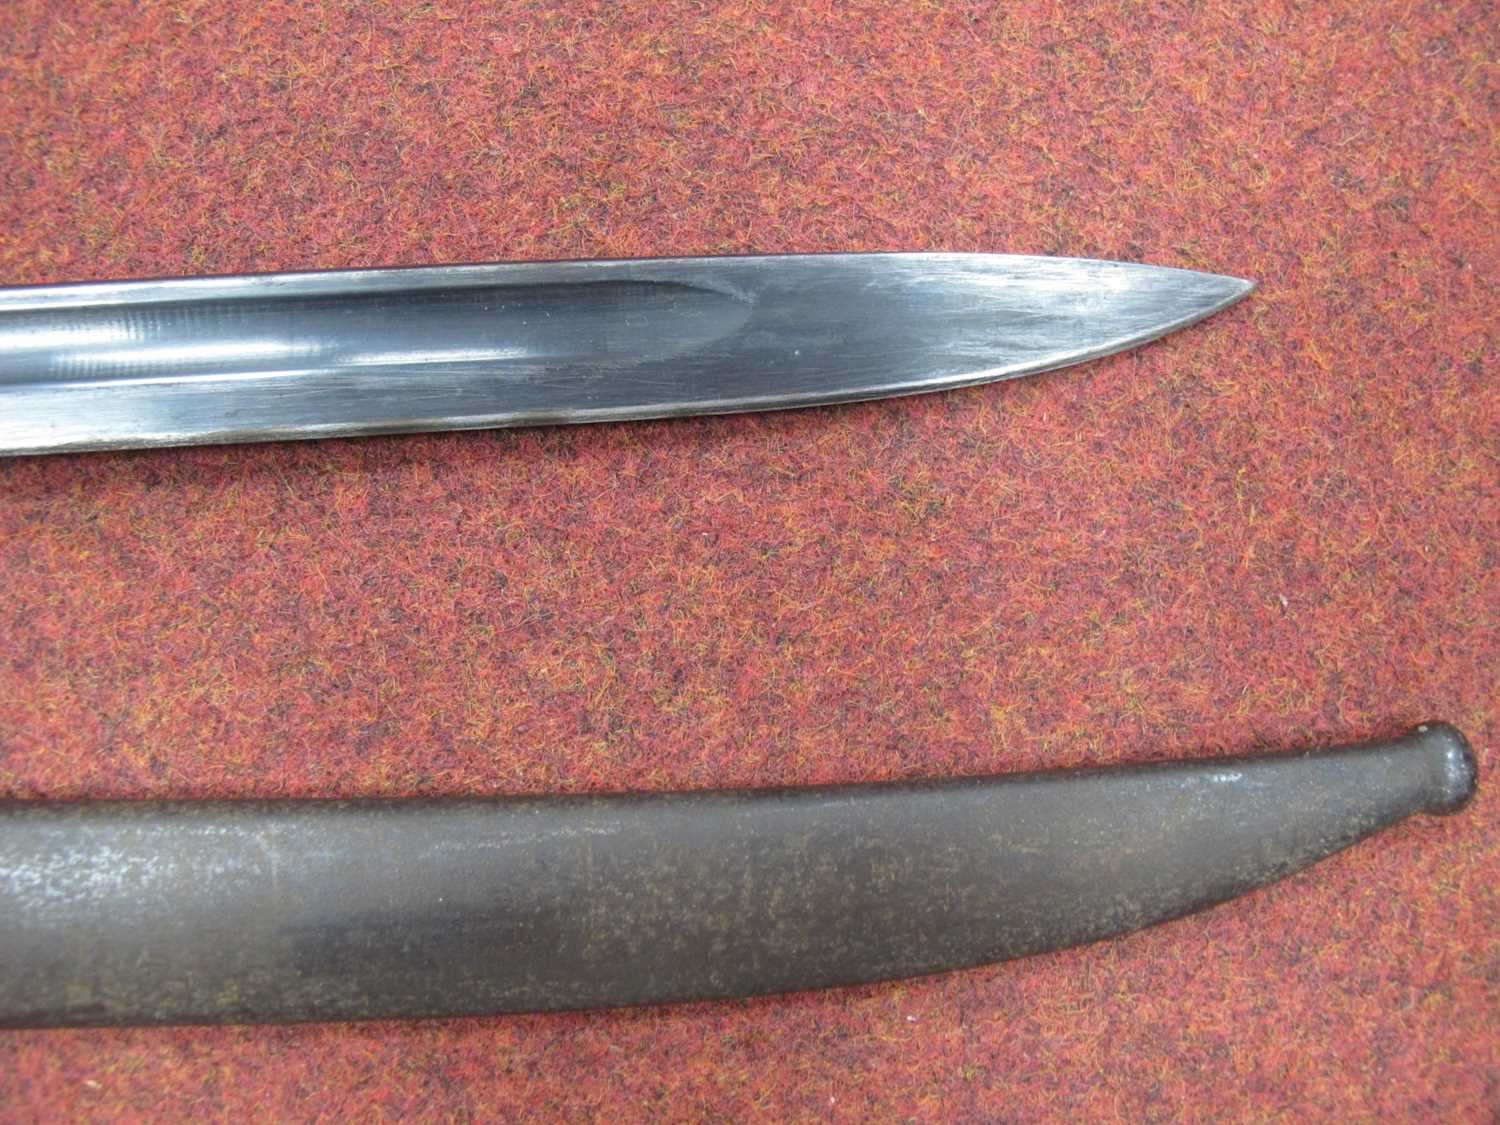 WWII Australian 1907 Pattern Bayonet, with various marks on blade including Year '42', - Image 7 of 11